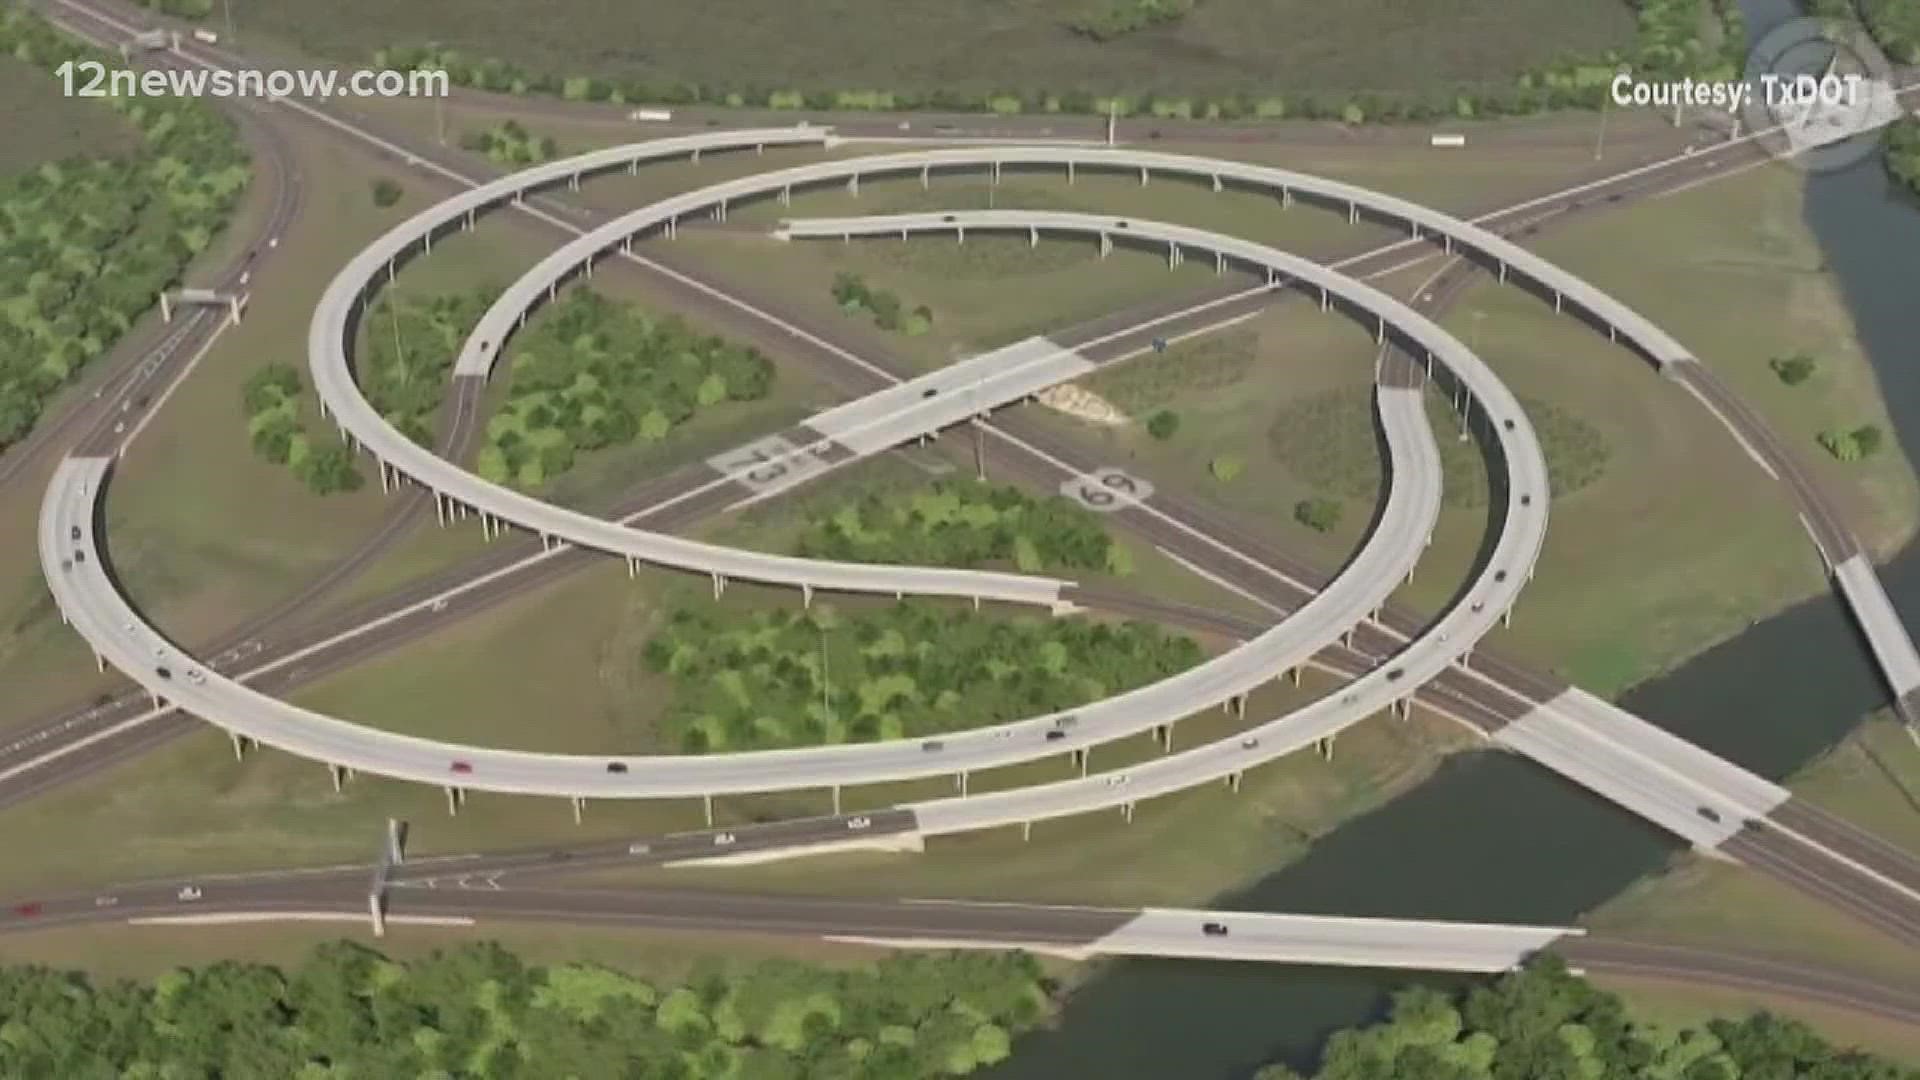 Many drivers in Port Arthur find the Cloverleaf interchange confusing, scary, and even dangerous at times.